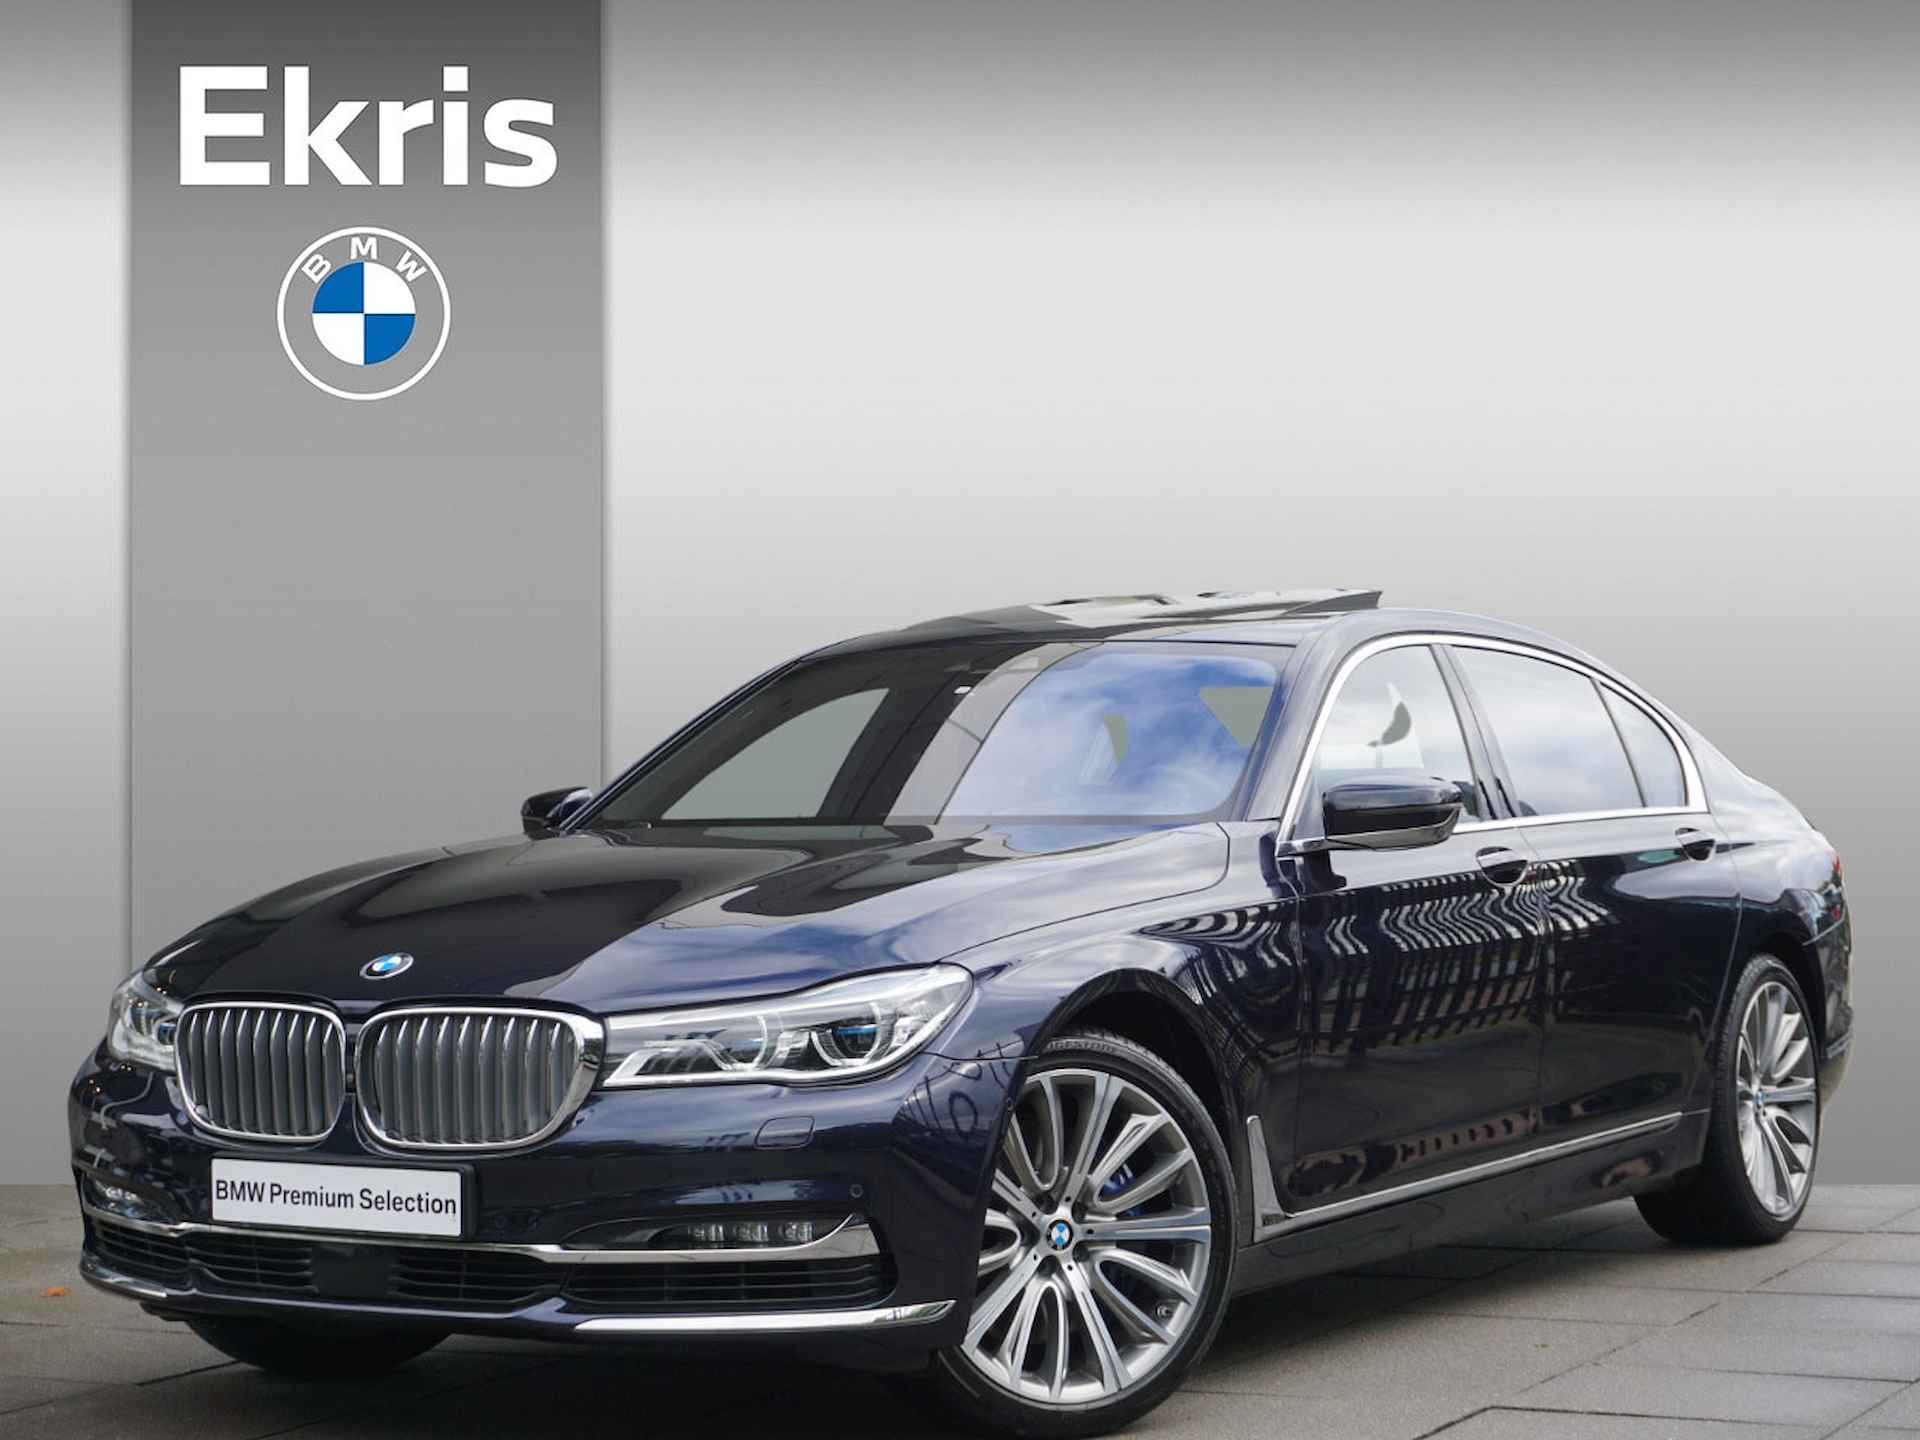 BMW 7 Serie Limousine 750Li xDrive Aut. High Executive / Pure Excellence / B&W Sound / Executive Lounge / Active Steering / Laserlight - 1/47